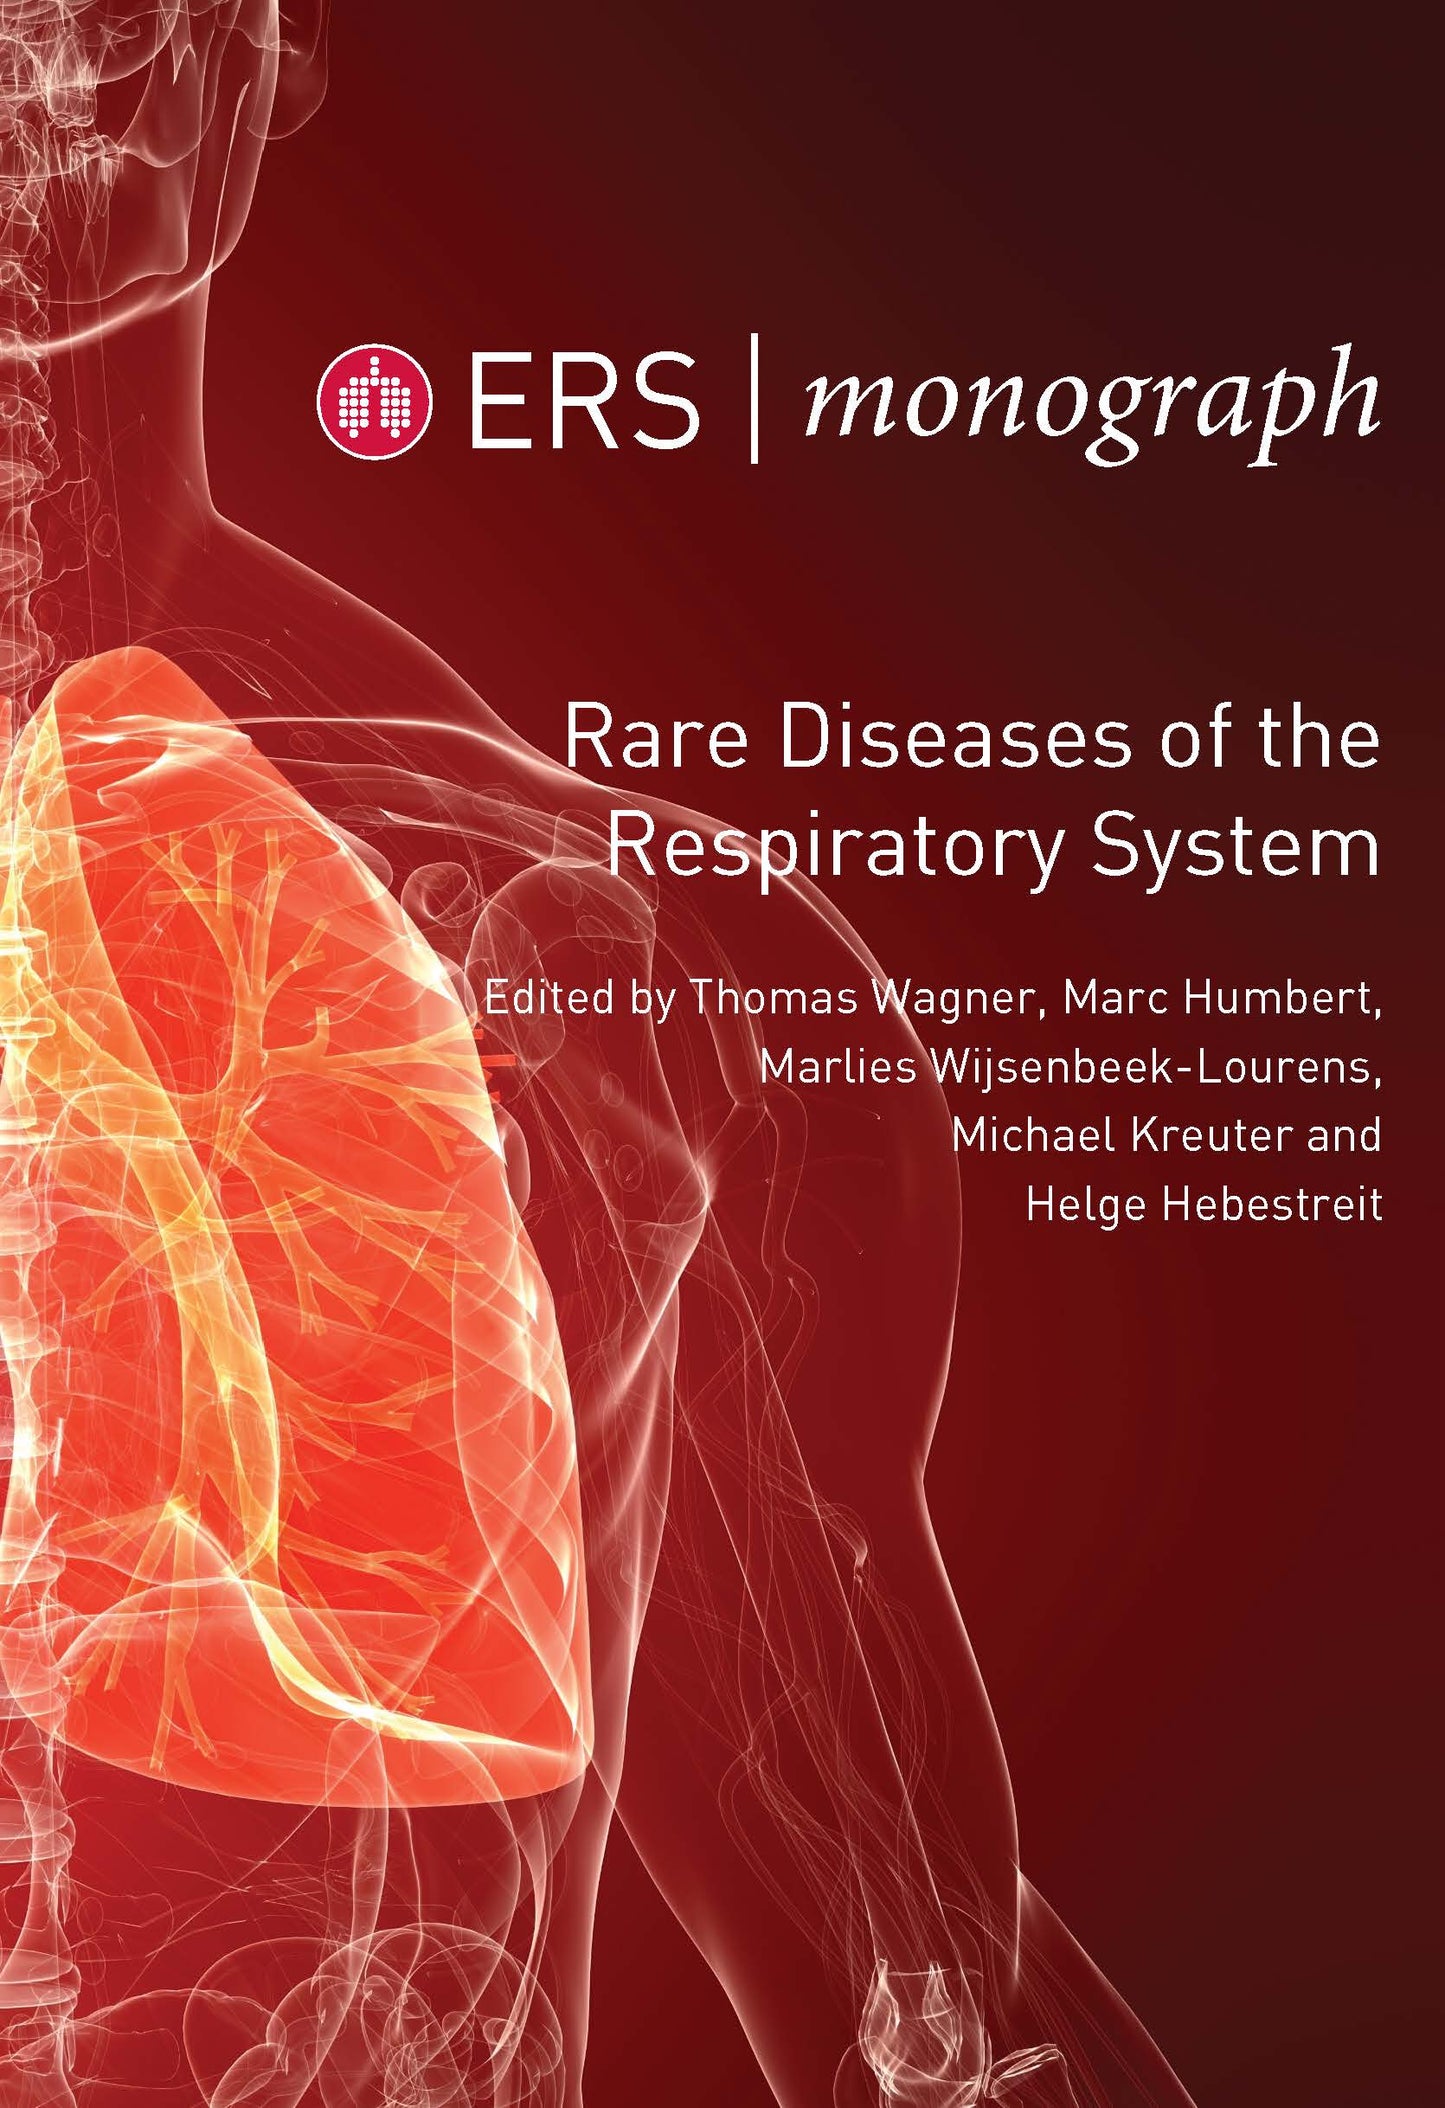 Front cover of ERS Monograph 100: Rare Diseases of the Respiratory System